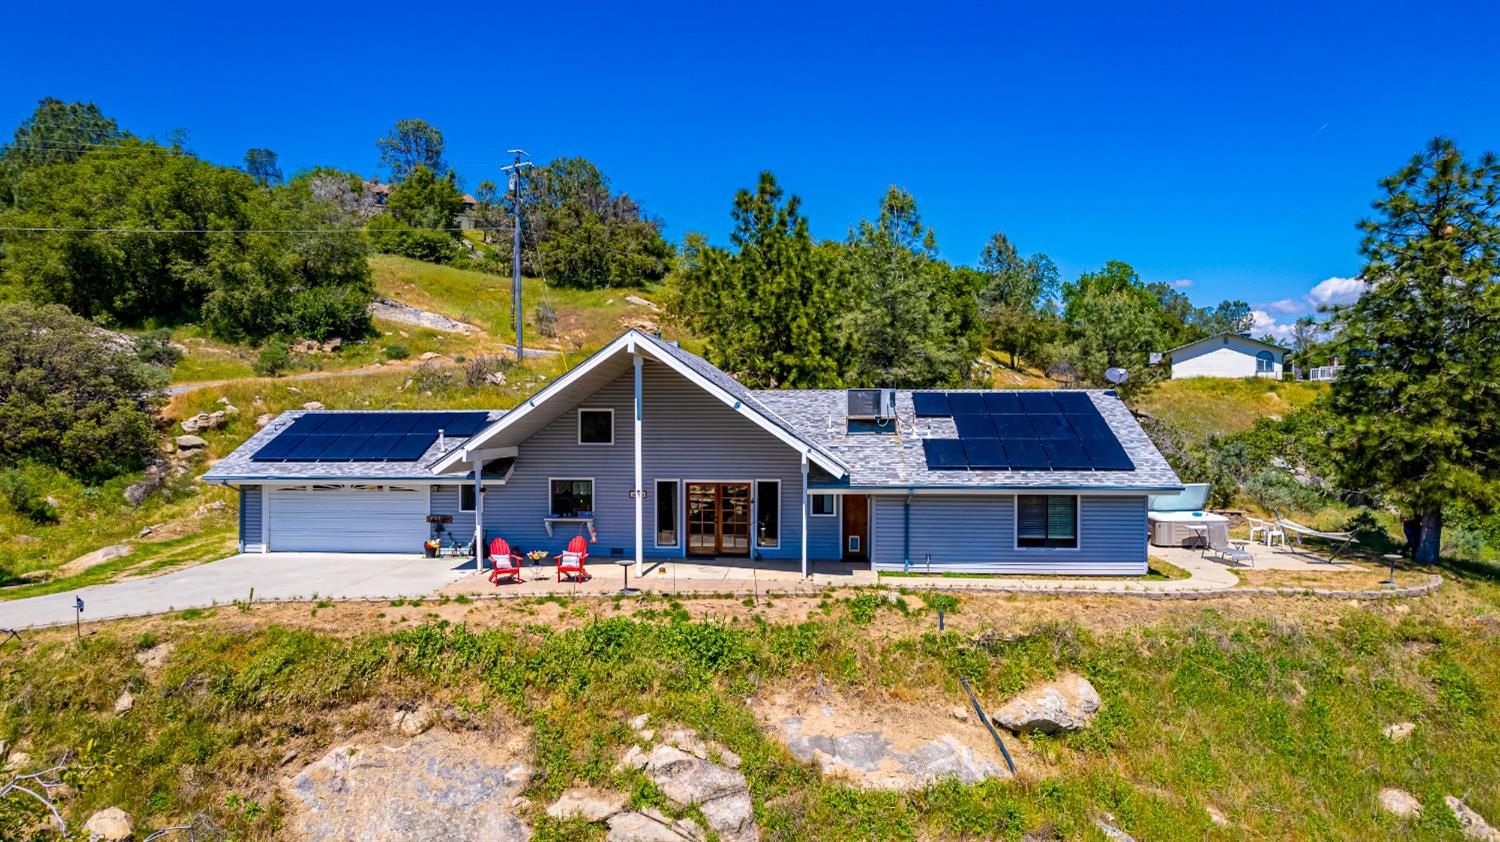 Photo of 30951 N Dome Dr in Coarsegold, CA